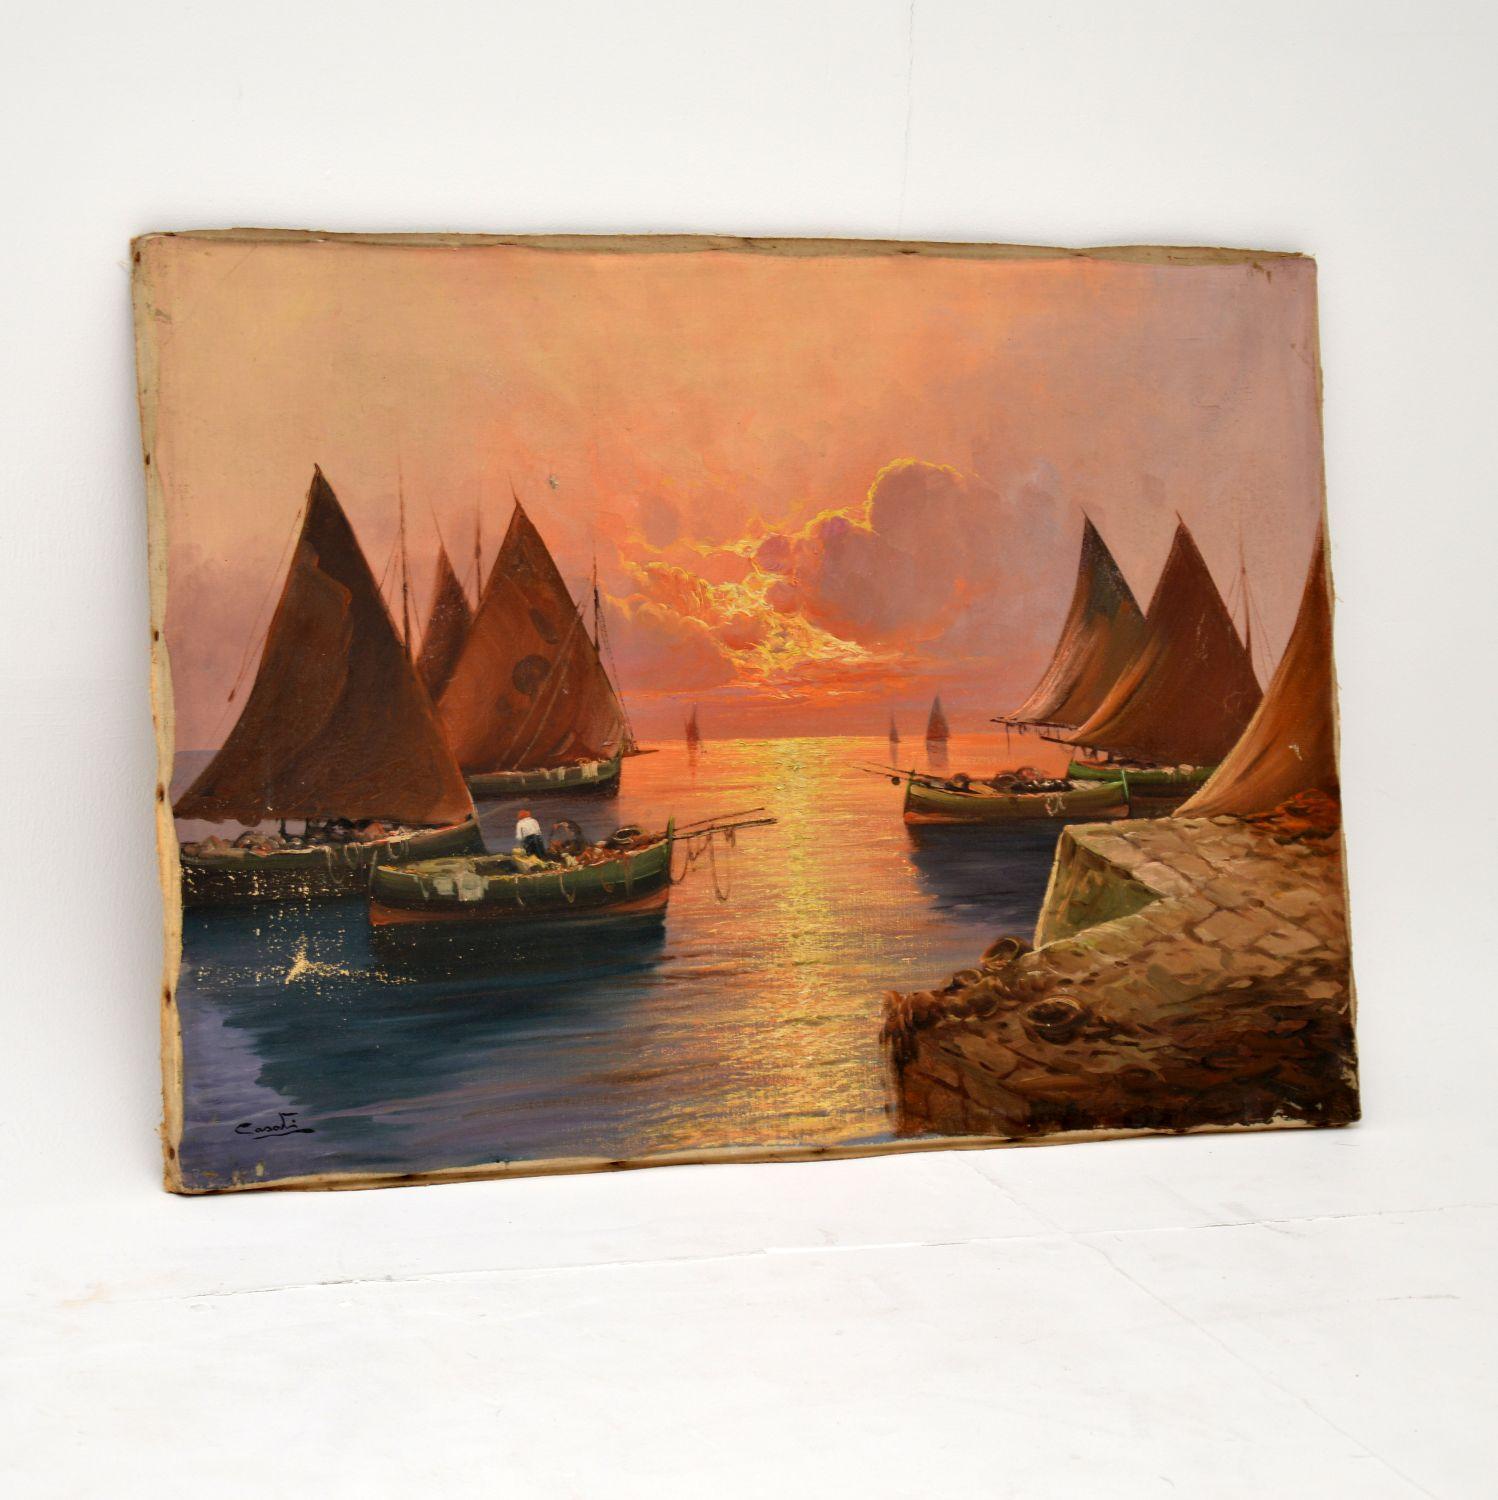 A beautiful antique oil painting on canvas, this is by the Italian artist Carlo Casati. It dates from the early 20th century, possibly 1920s-1930s.

It is beautifully executed and depicts a beautiful sunset, with lovely warm colors. This is